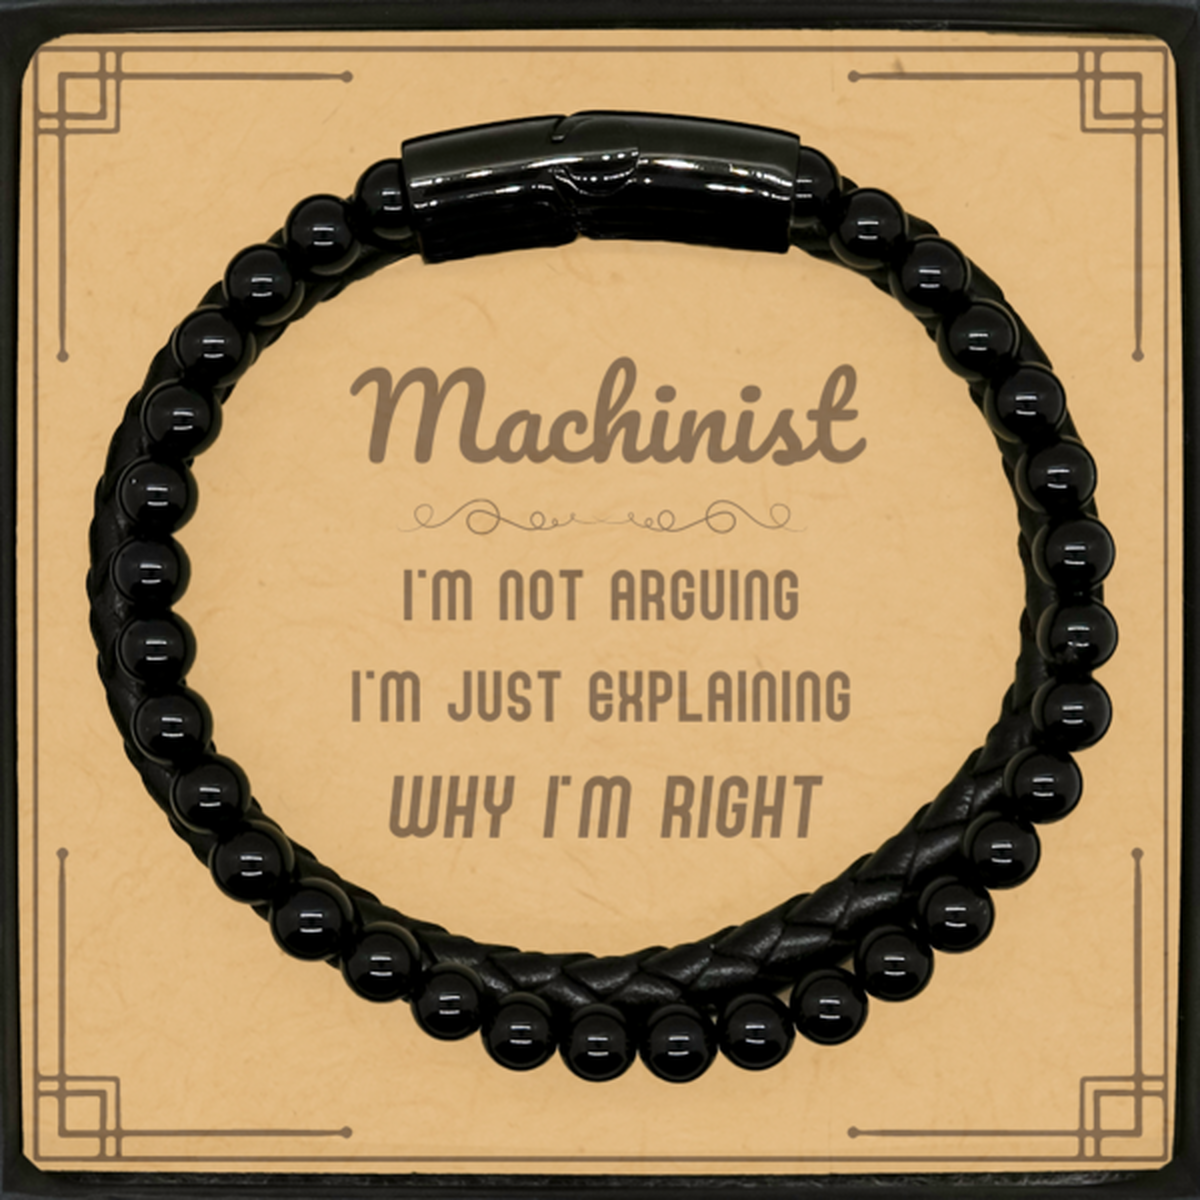 Machinist I'm not Arguing. I'm Just Explaining Why I'm RIGHT Stone Leather Bracelets, Funny Saying Quote Machinist Gifts For Machinist Message Card Graduation Birthday Christmas Gifts for Men Women Coworker